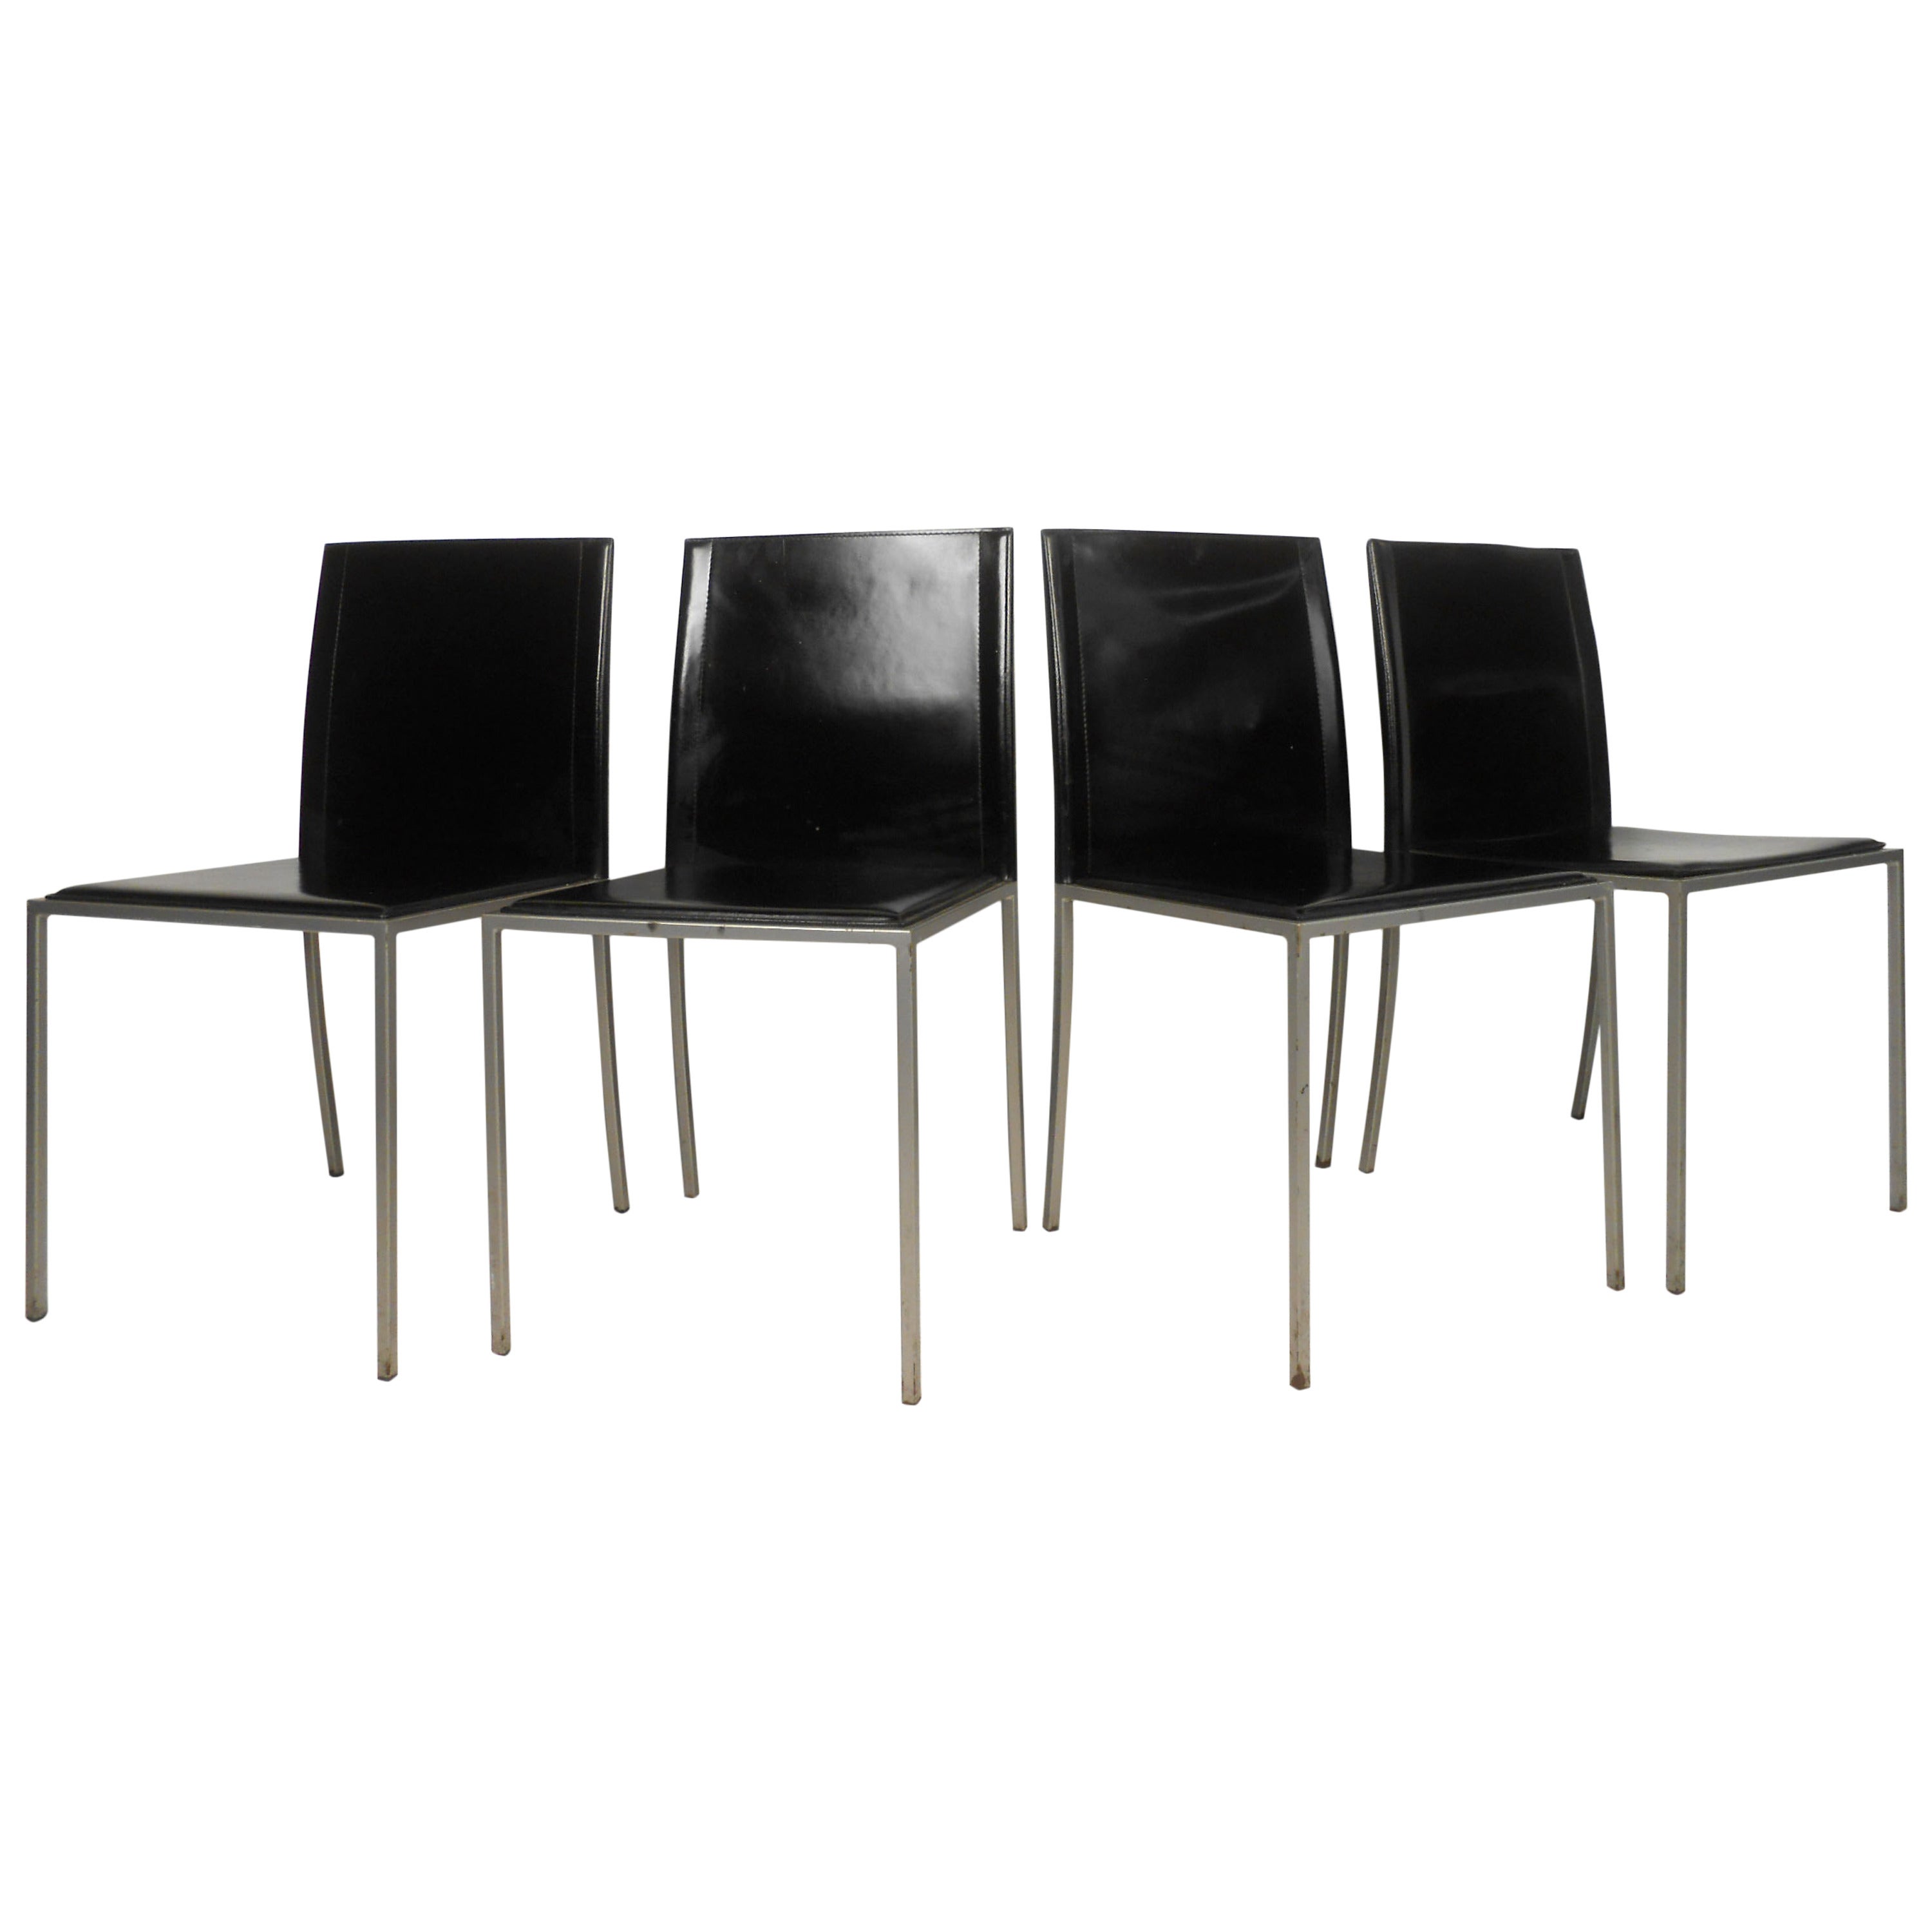 Set of Four Midcentury Italian Leather Dining Chairs by Calligaris